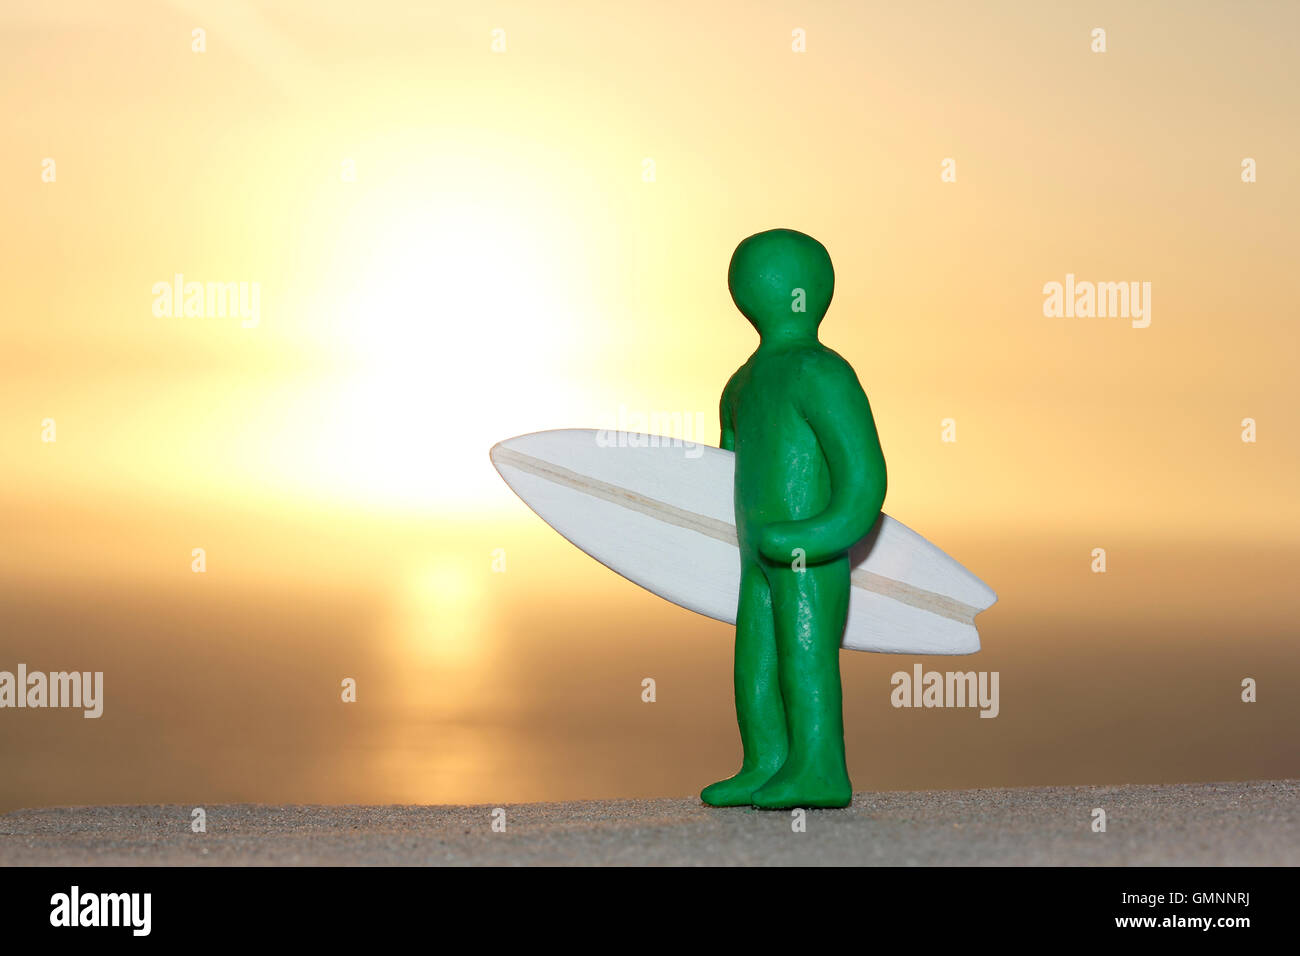 Plasticine Person and Balsa Wood Surfboard at Sunset Stock Photo